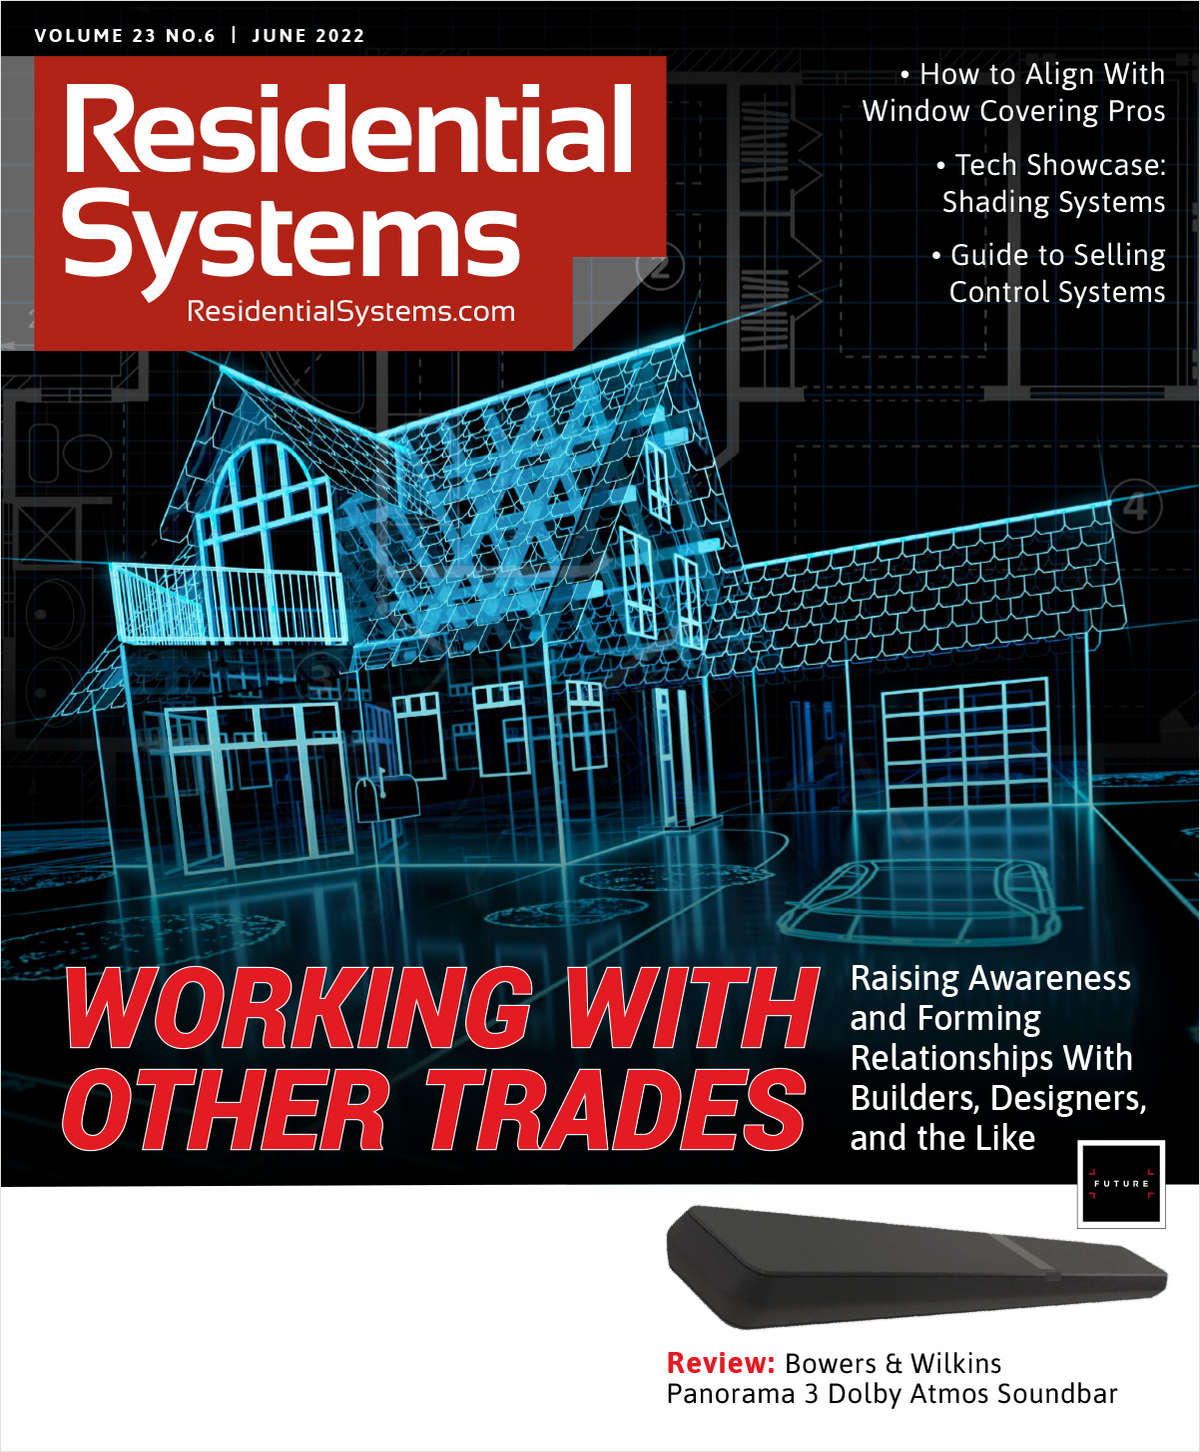 Residential Systems